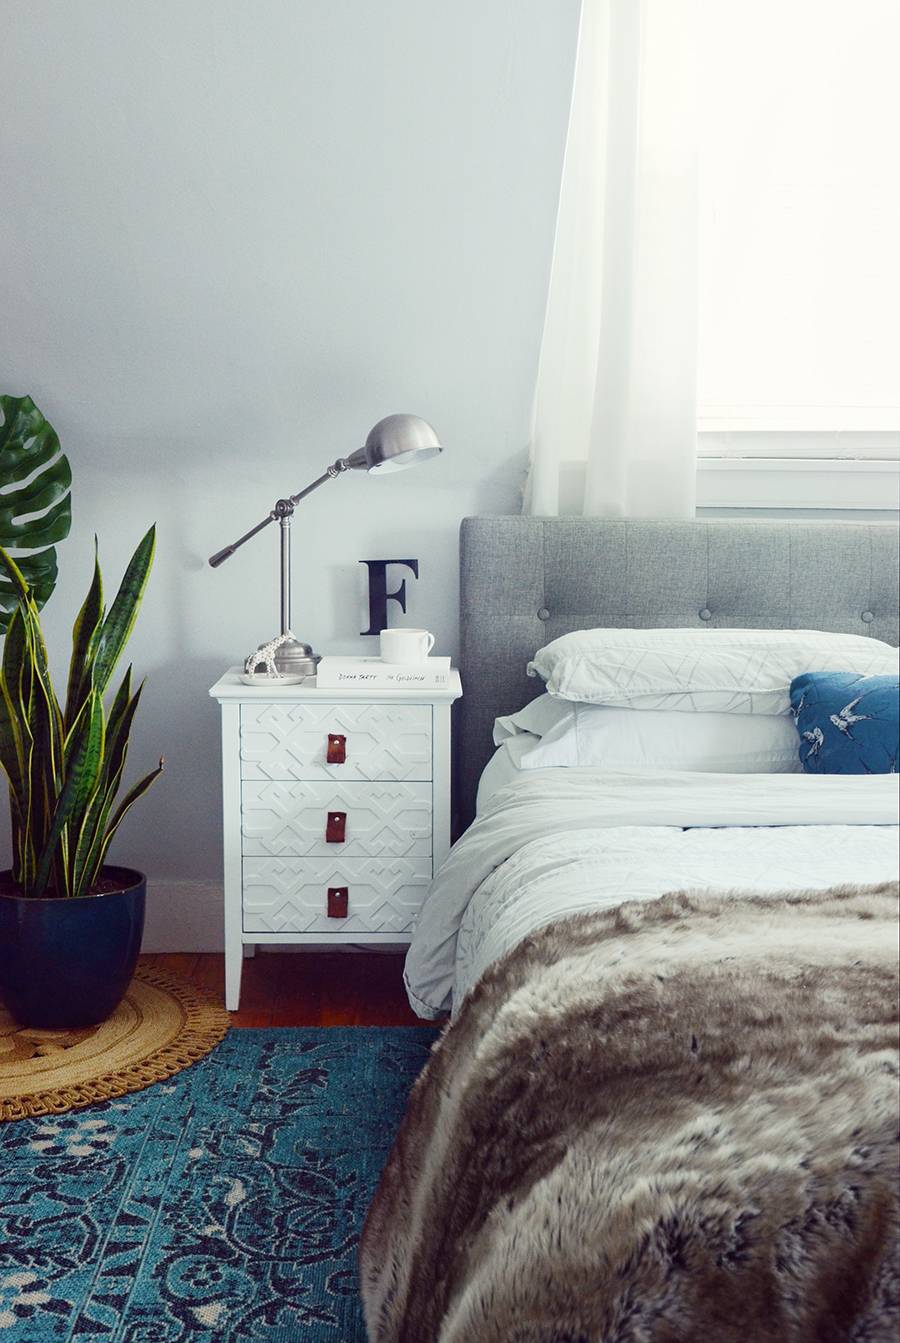 A lamp is sitting on a white bedside table between a bed and a plant.